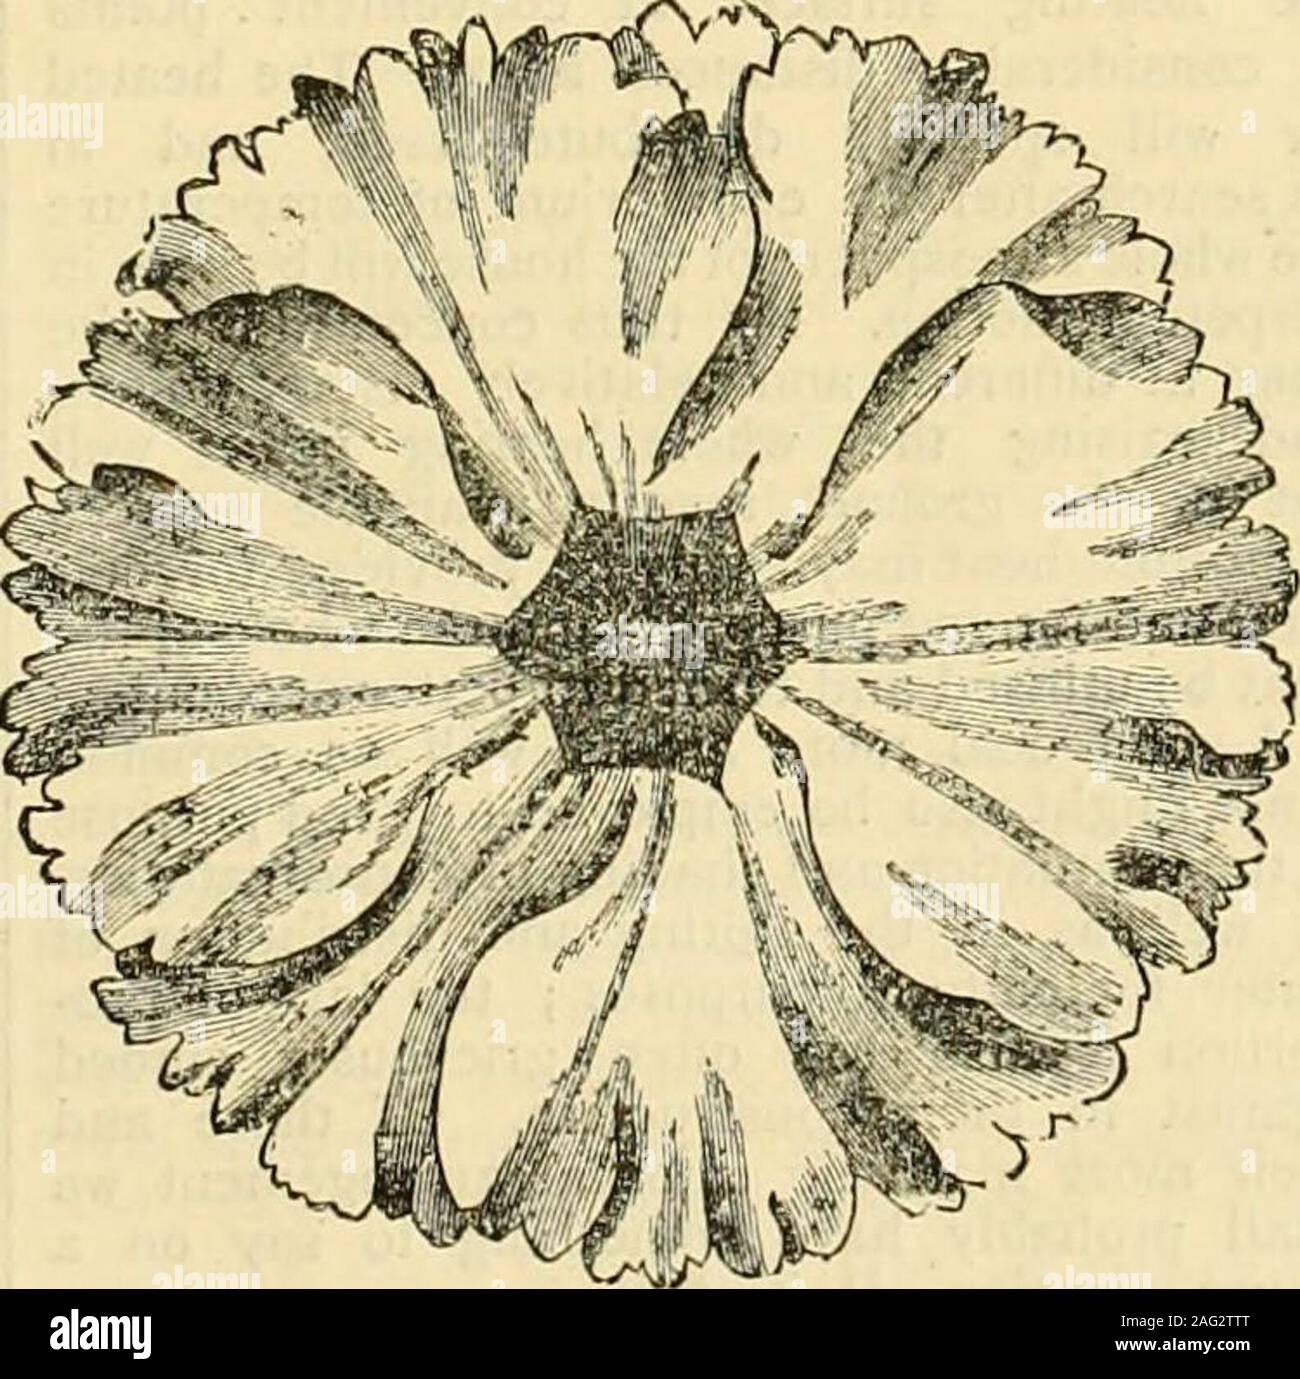 . The Gardeners' chronicle : a weekly illustrated journal of horticulture and allied subjects. i^iS CINERARIA, WeatheriUs Extra Choice Strain, 5^..3J. 6c/., 25. 6d., and Fiont Mr. Gray, Gardeucr to — Walker, Esq.,yanuary 8, 1880. I am pleased to inform you that the Cinerariaseed had from you last year has proved a grandstrain, for 1 have some very fine flowers over 2 inchesacross. CYCLAMEN PERSICUM, Brilliant (New) . CYCLAMEN PERSICUM GIGANTEUM, 5s., . SJ. and 35. 6d, & CYCLAMEN PERSICUM GIGANTEUM RUBRUM(New) .. .. .. .. .. 5s. and CYCLAMEN PERSICUM, Williams Superb Strain, ^s., 31. 6(f , -ss. Stock Photo